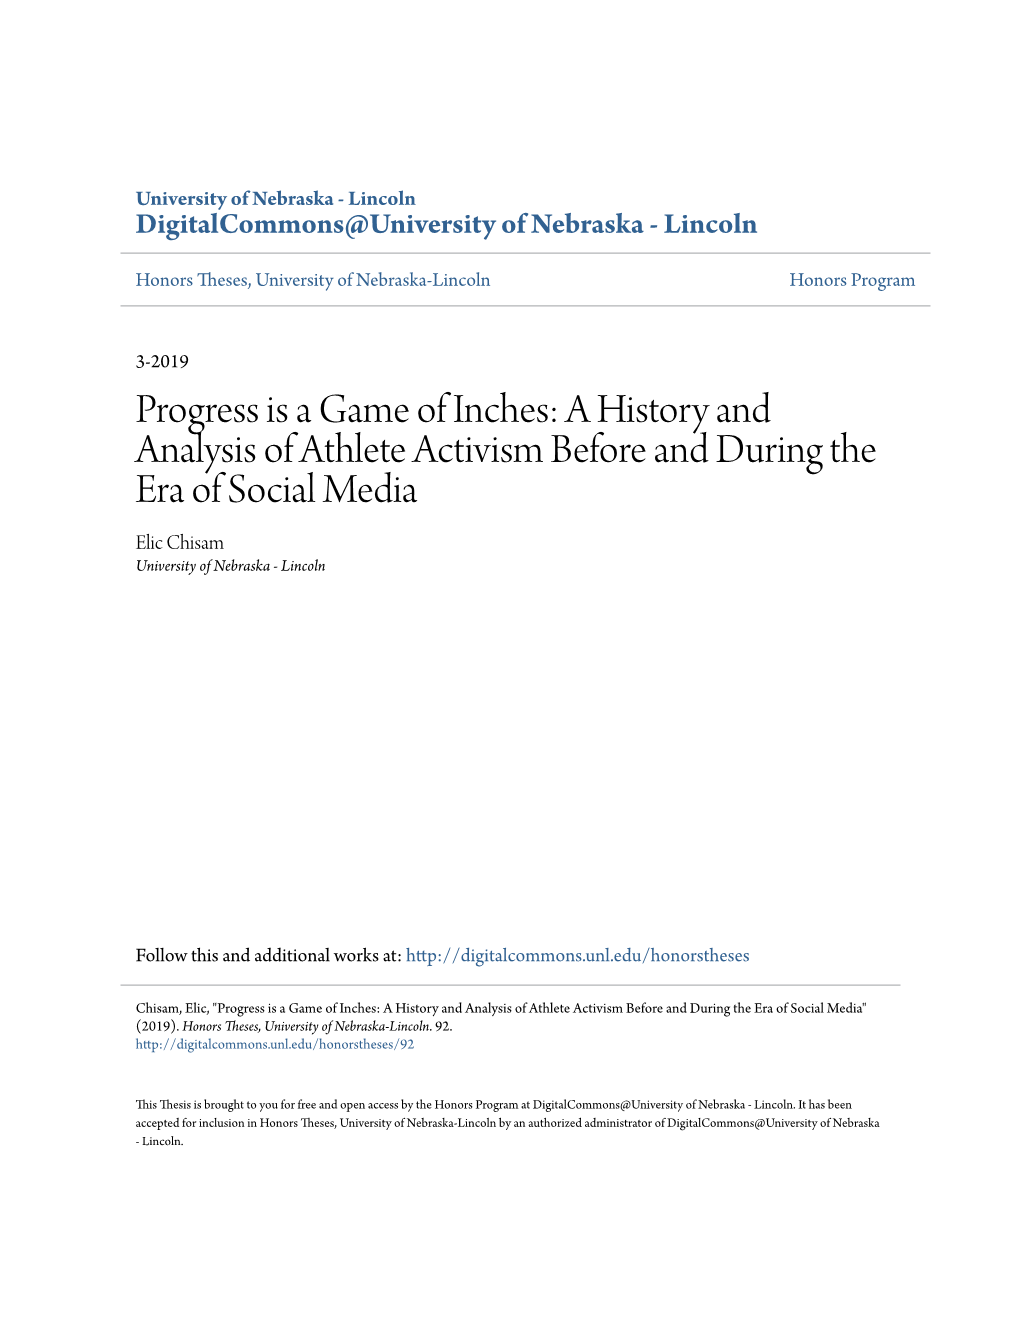 Progress Is a Game of Inches: a History and Analysis of Athlete Activism Before and During the Era of Social Media Elic Chisam University of Nebraska - Lincoln